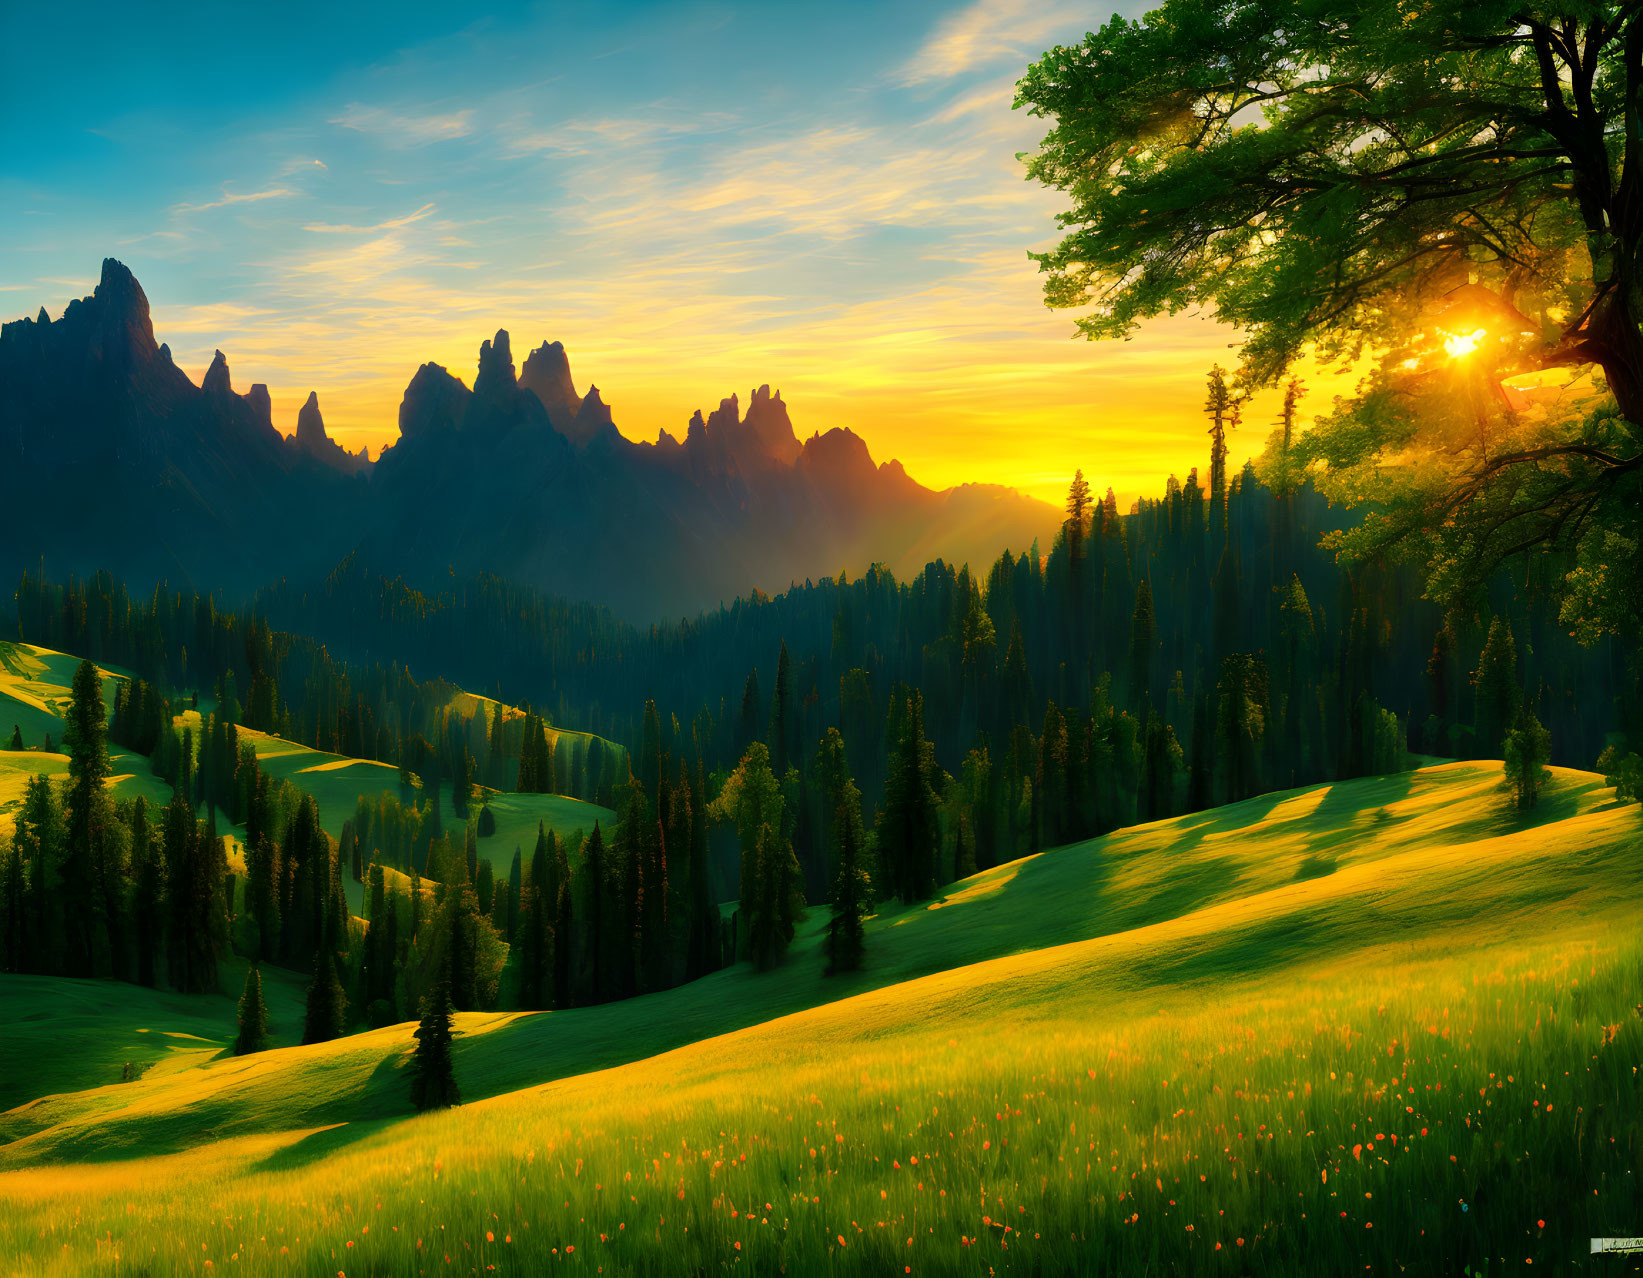 Scenic sunrise landscape with meadow, tree, and mountains